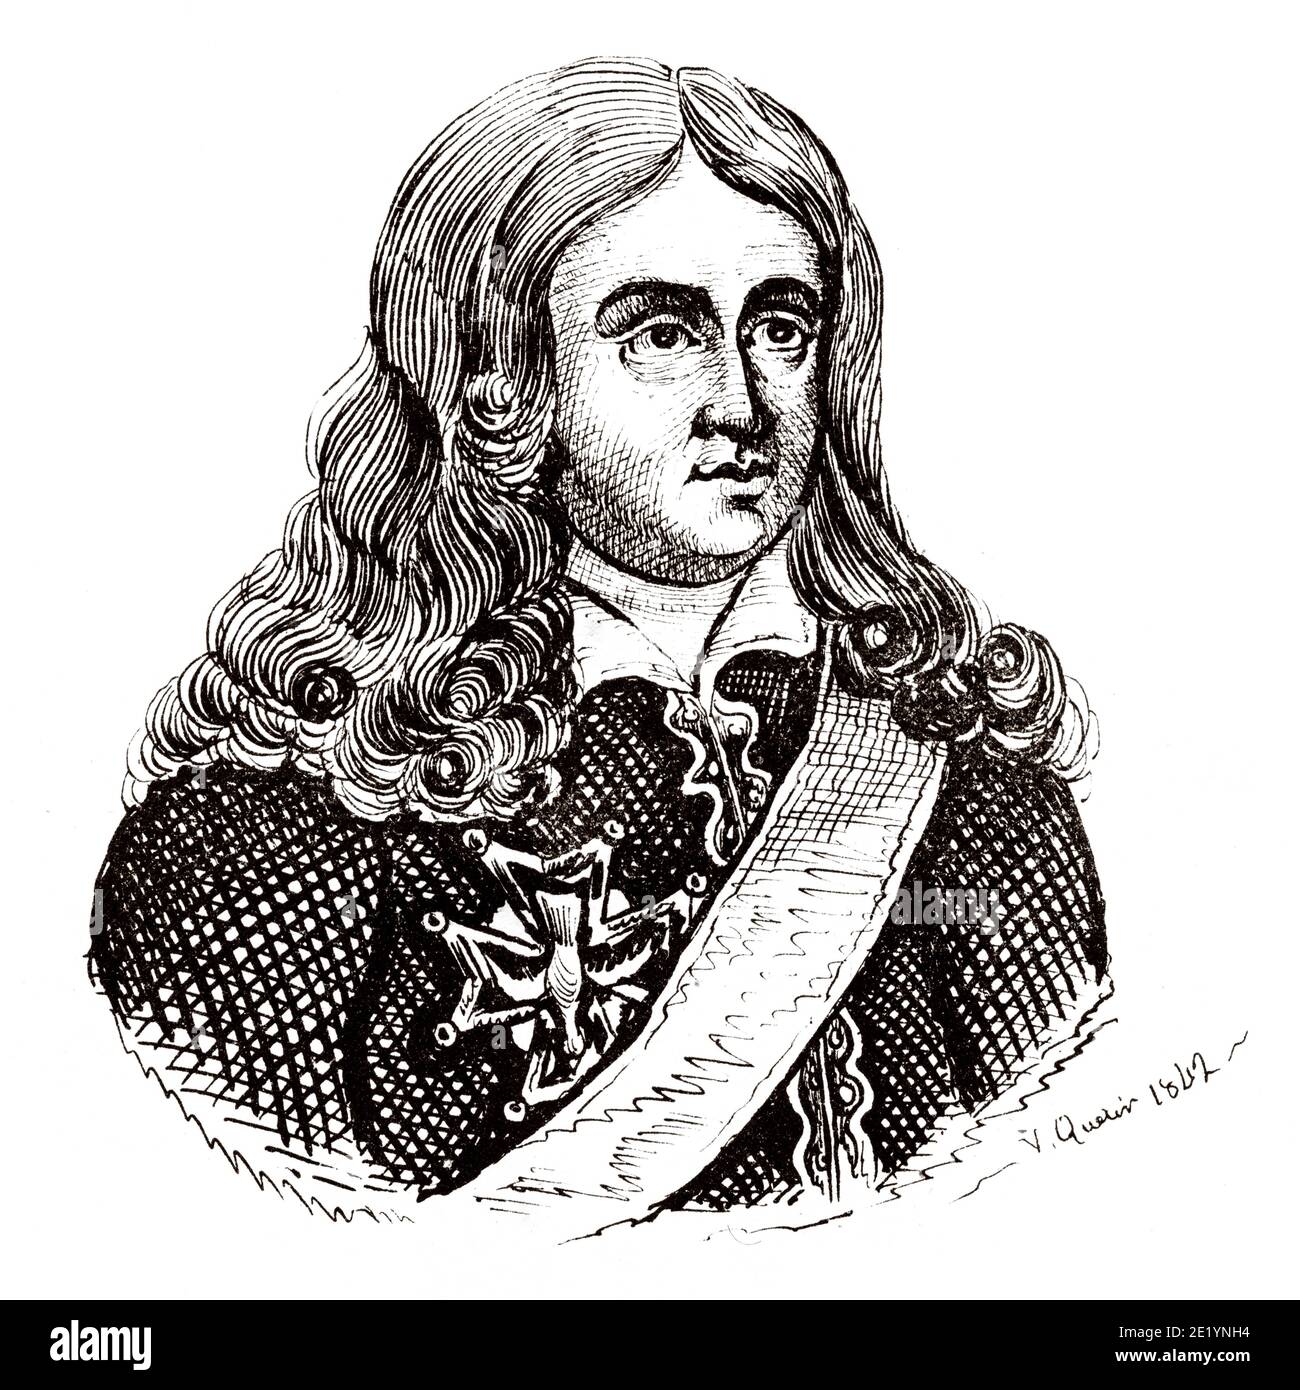 Louis xvii king of france 1785 1795 Cut Out Stock Images & Pictures - Alamy